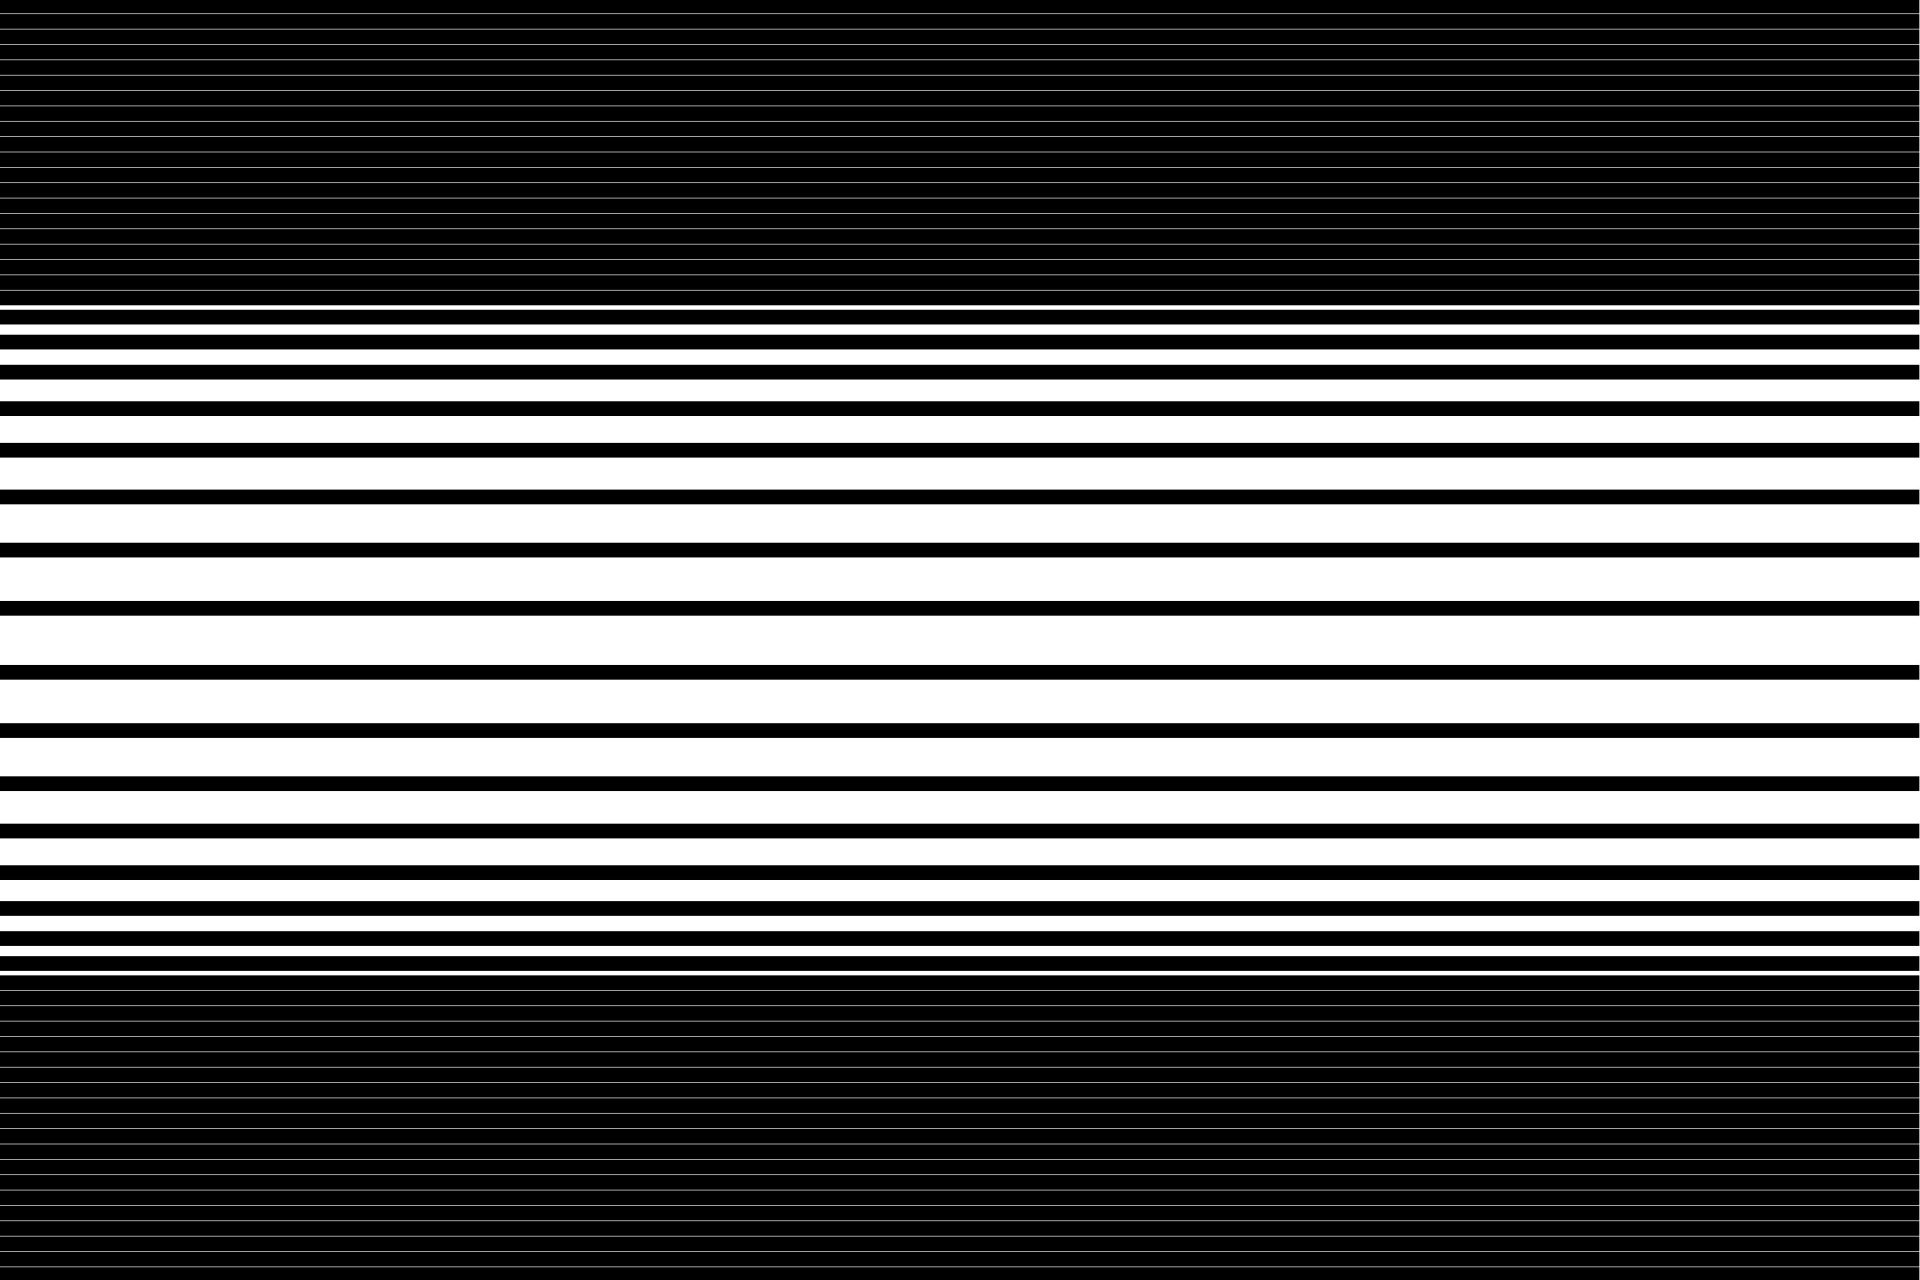 Black and white lines background by Susanlu4esm